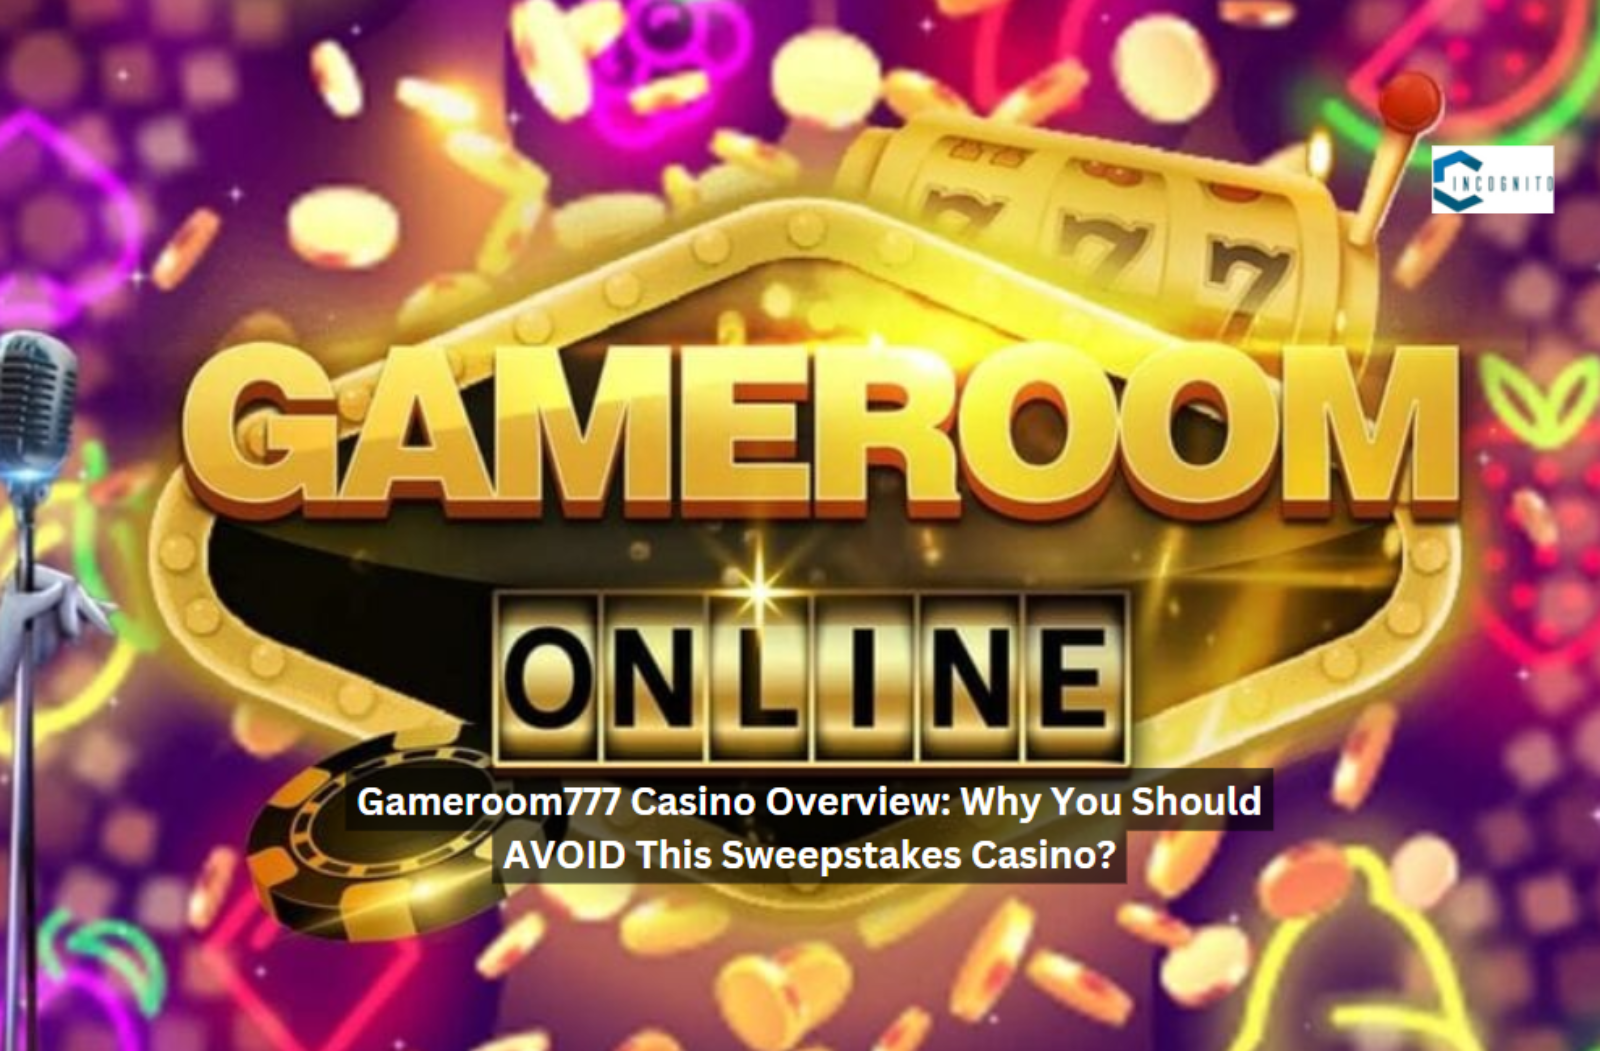 Gameroom777 Casino Overview: Why You Should AVOID This Sweepstakes Casino?